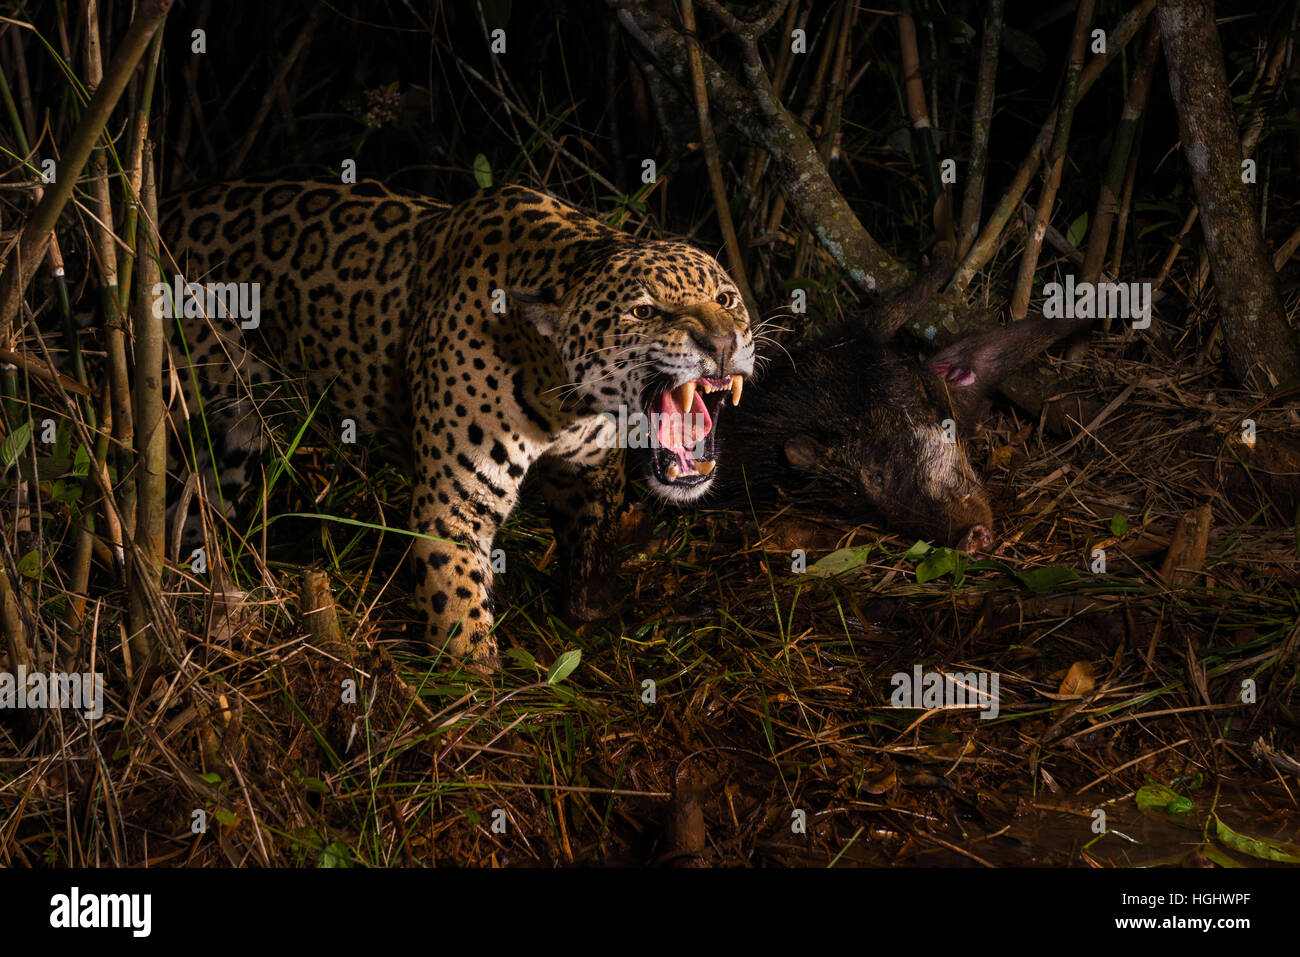 A large male Jaguar aggressively defending its prey, a White-lipped Peccary Stock Photo